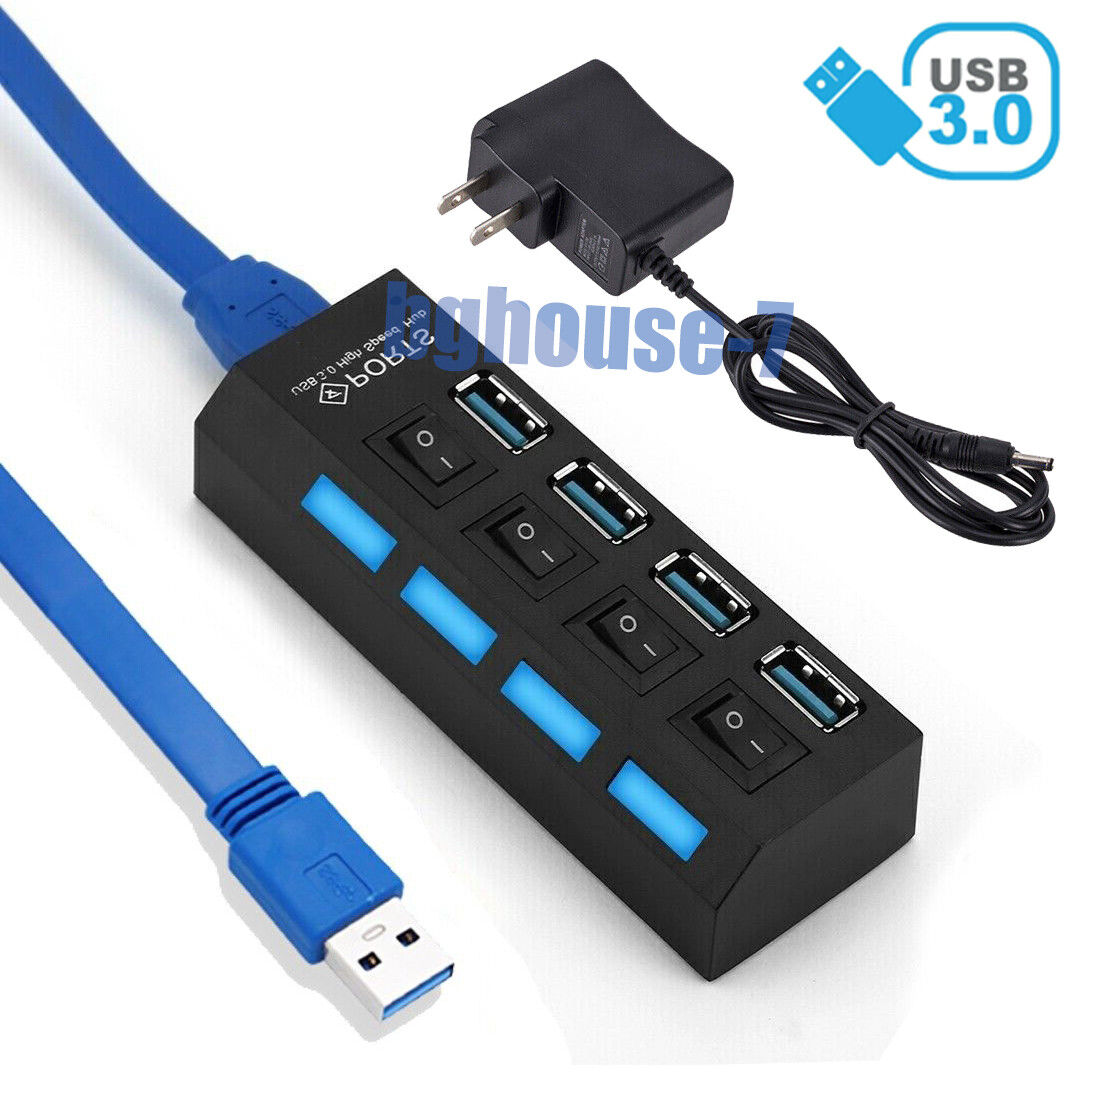 4 Ports USB 3.0 HUB Splitter Adapter AC Power Cable with off Switch Super Speed